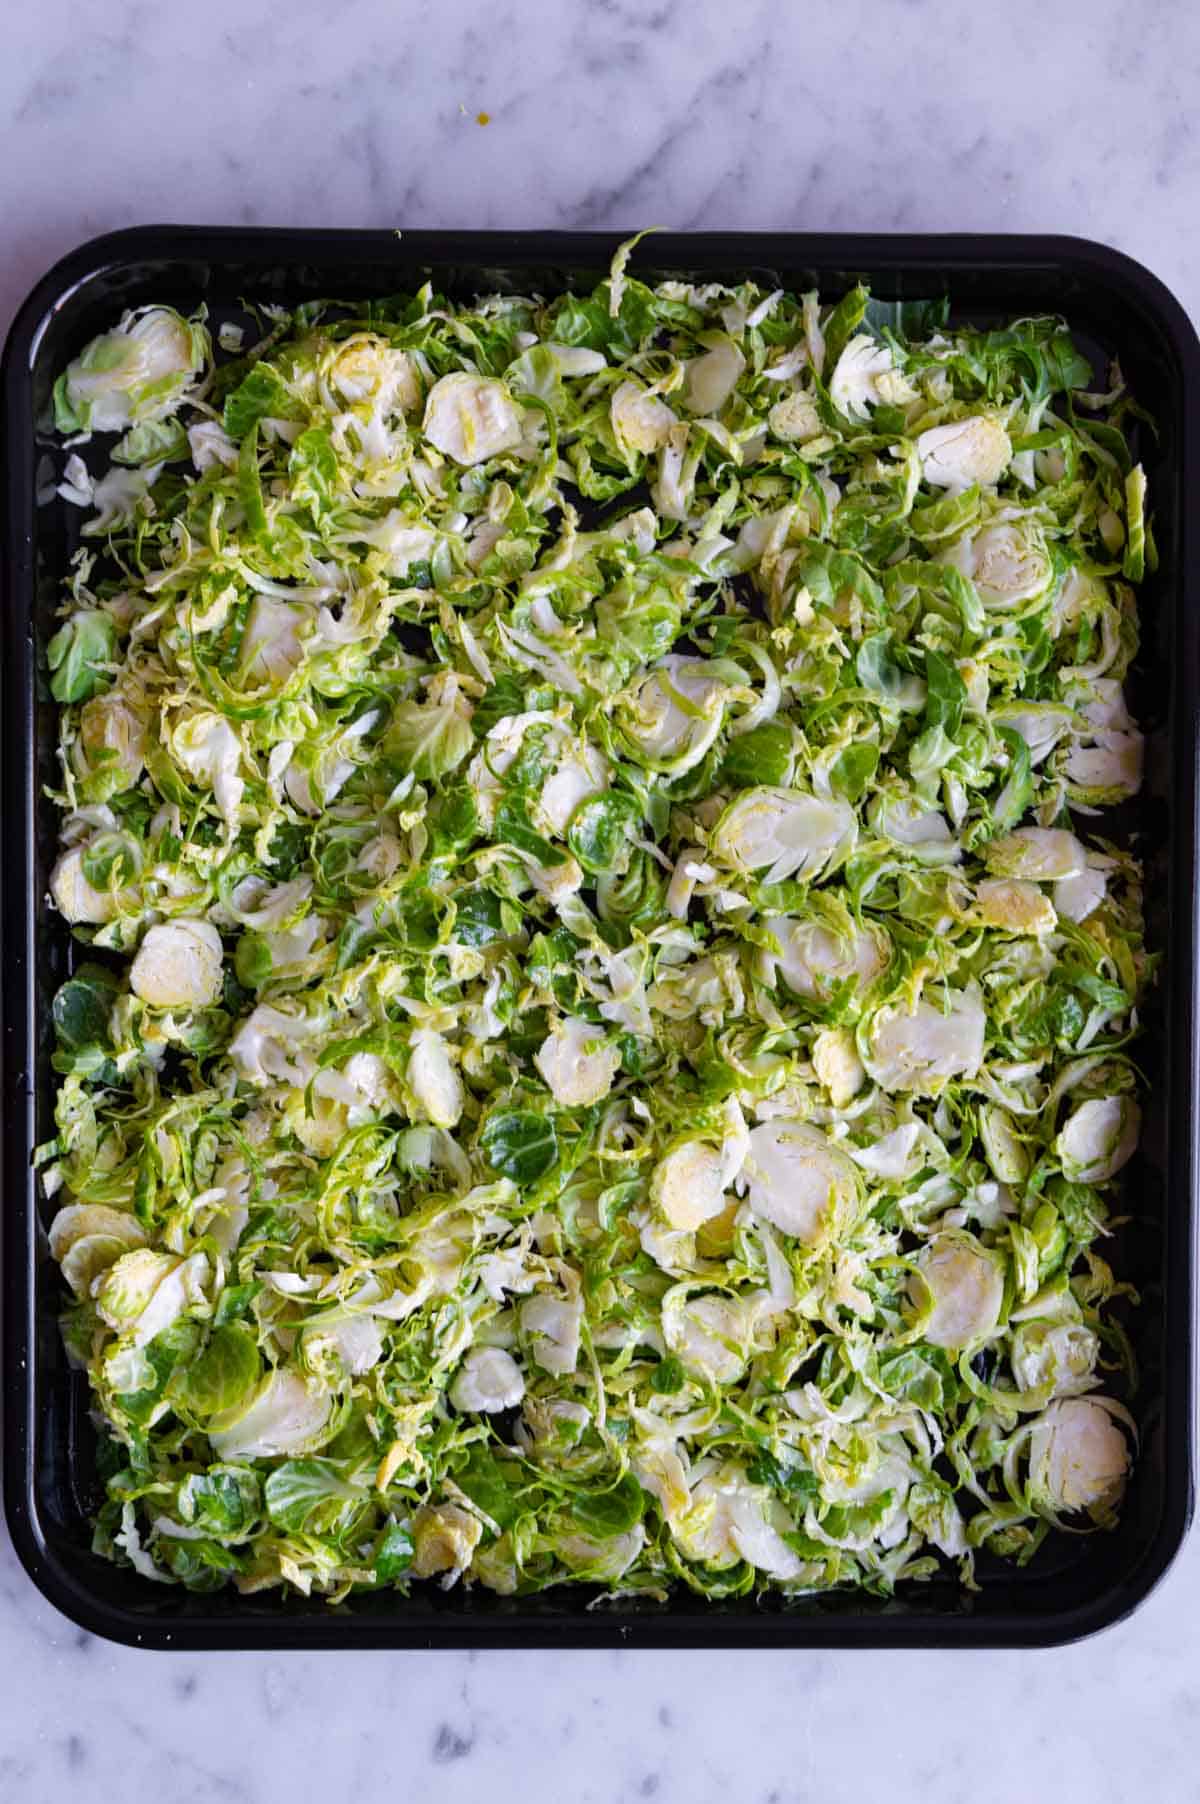 Shaved Brussels sprouts on a black nonstick rimmed baking sheet.